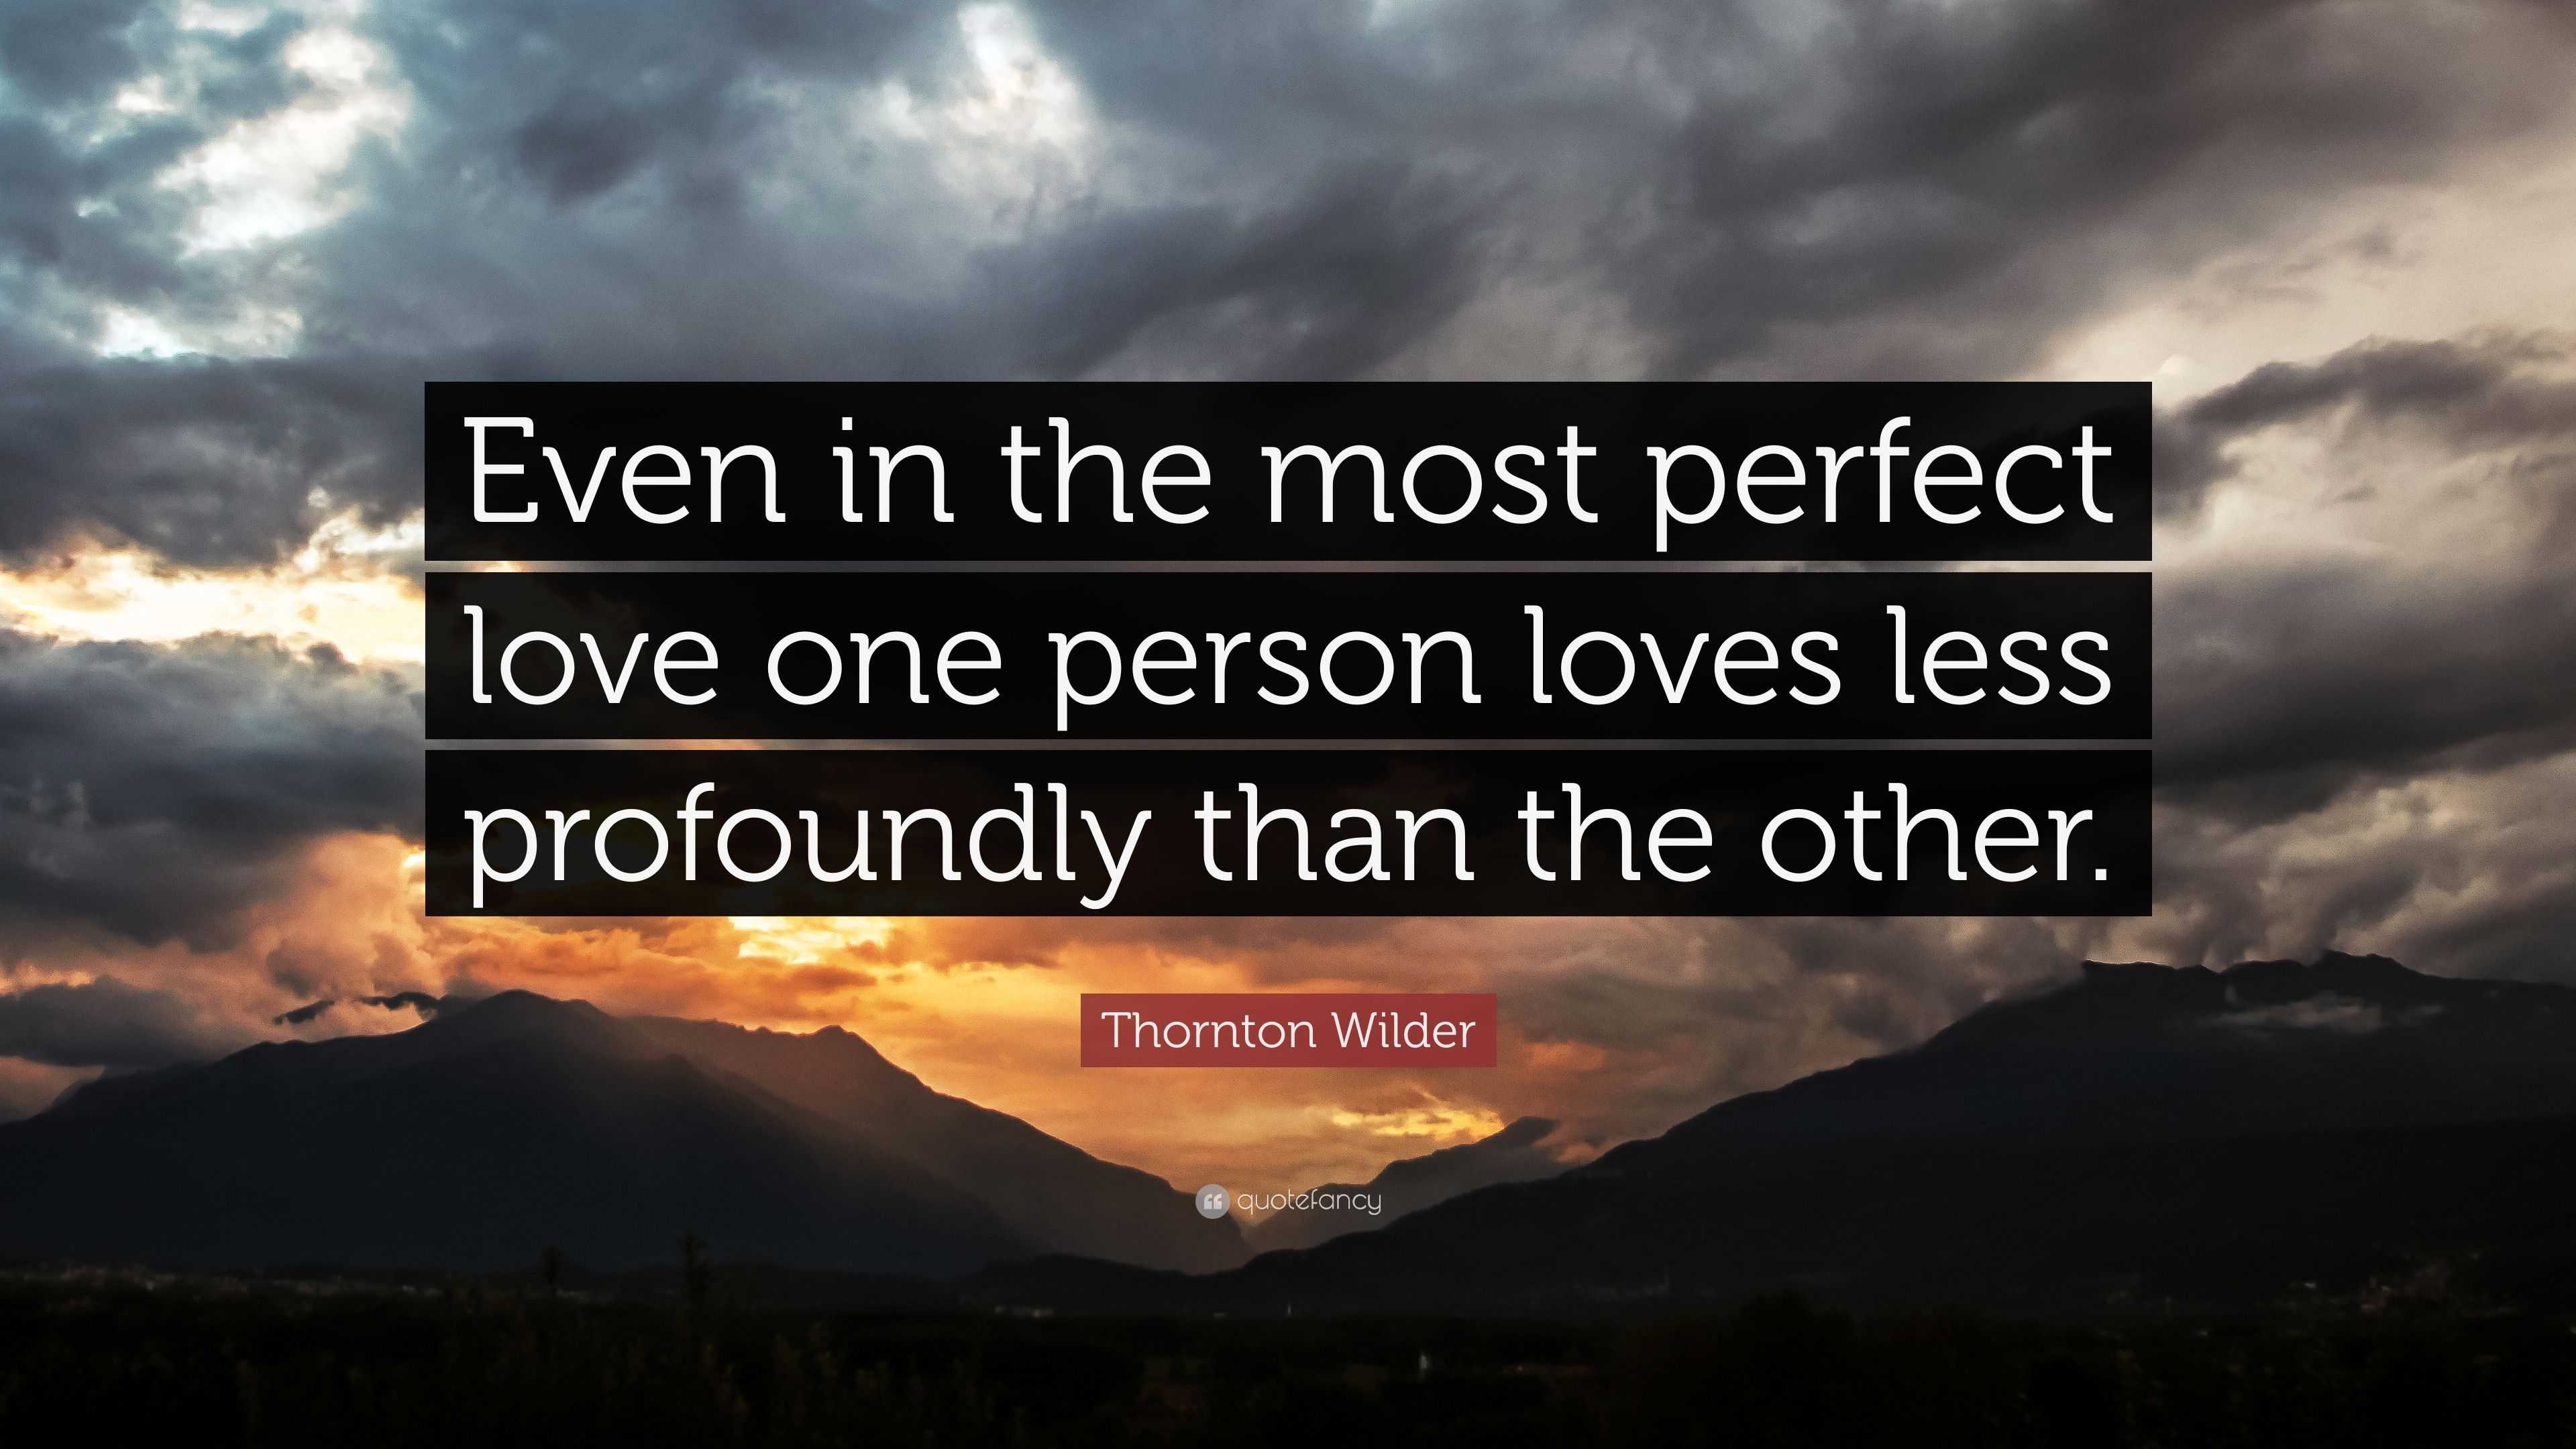 Thornton Wilder Quote “Even in the most perfect love one person loves less profoundly